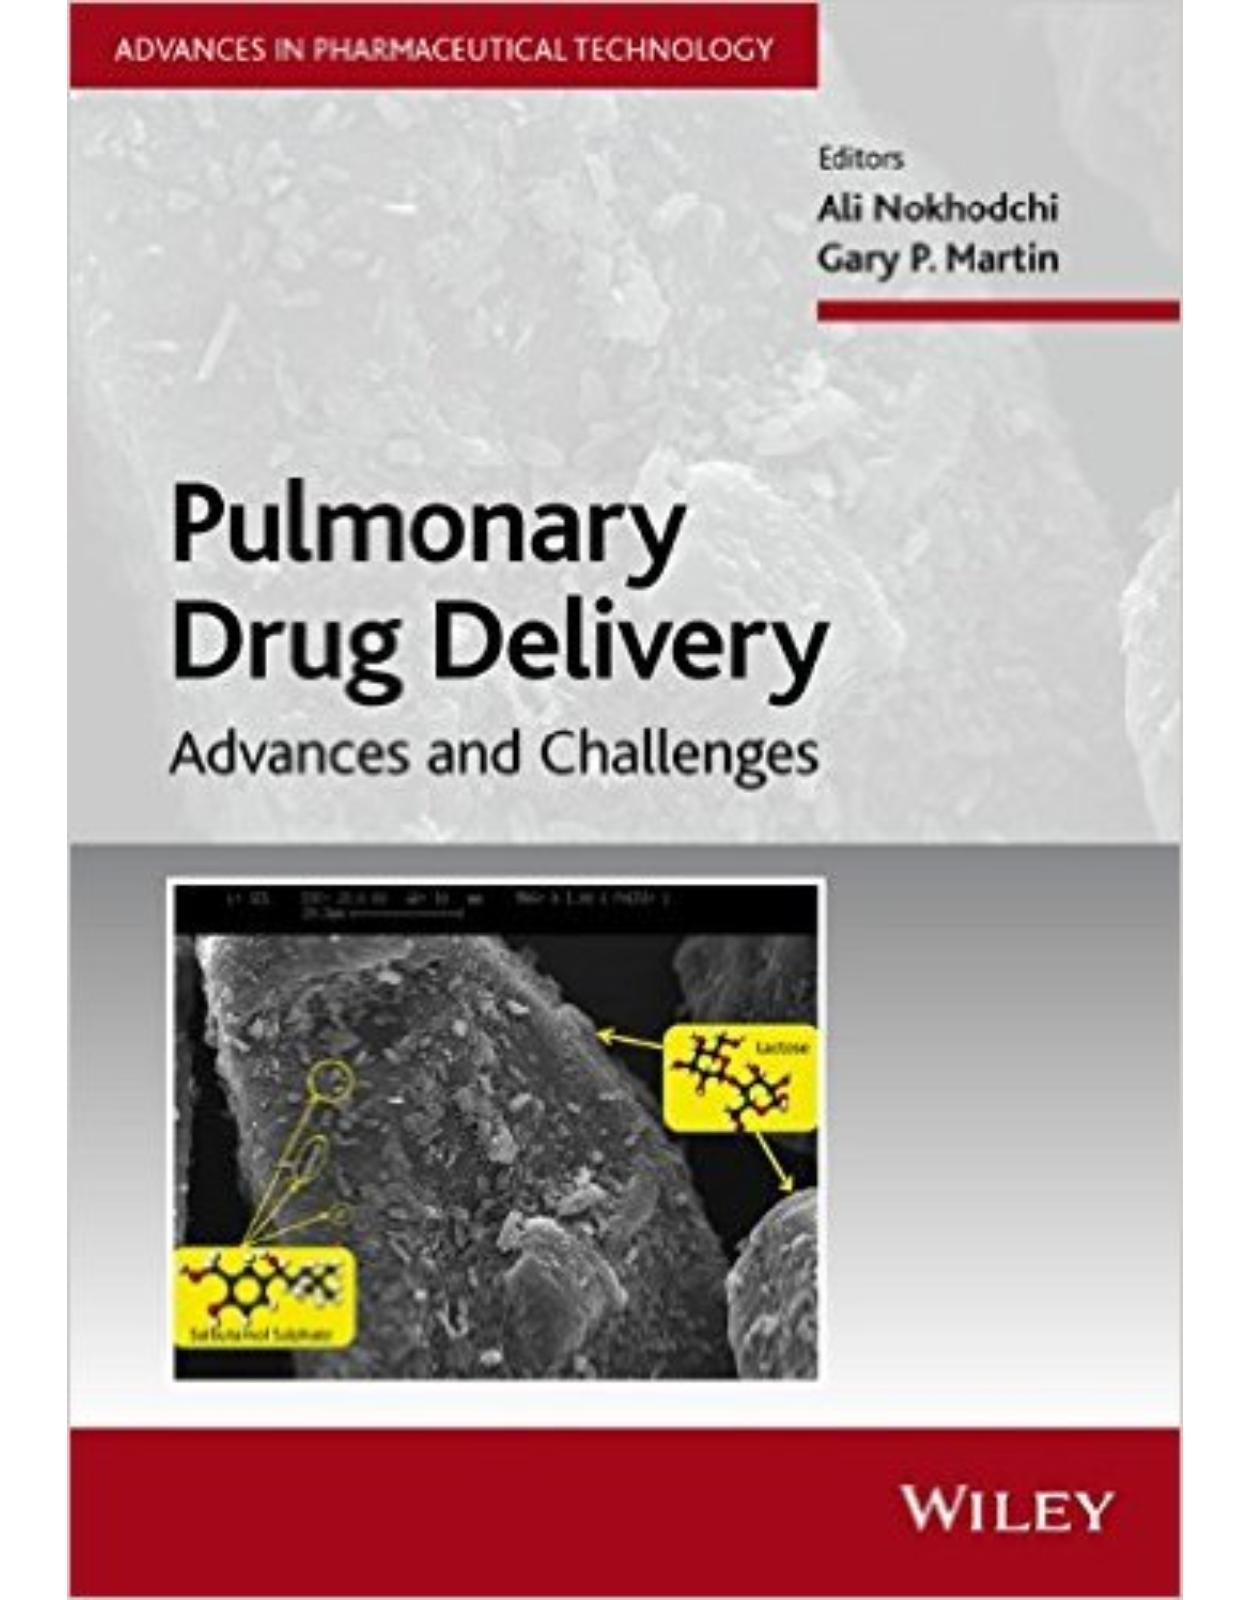 Pulmonary Drug Delivery: Advances and Challenges (Advances in Pharmaceutical Technology) 1st Edition